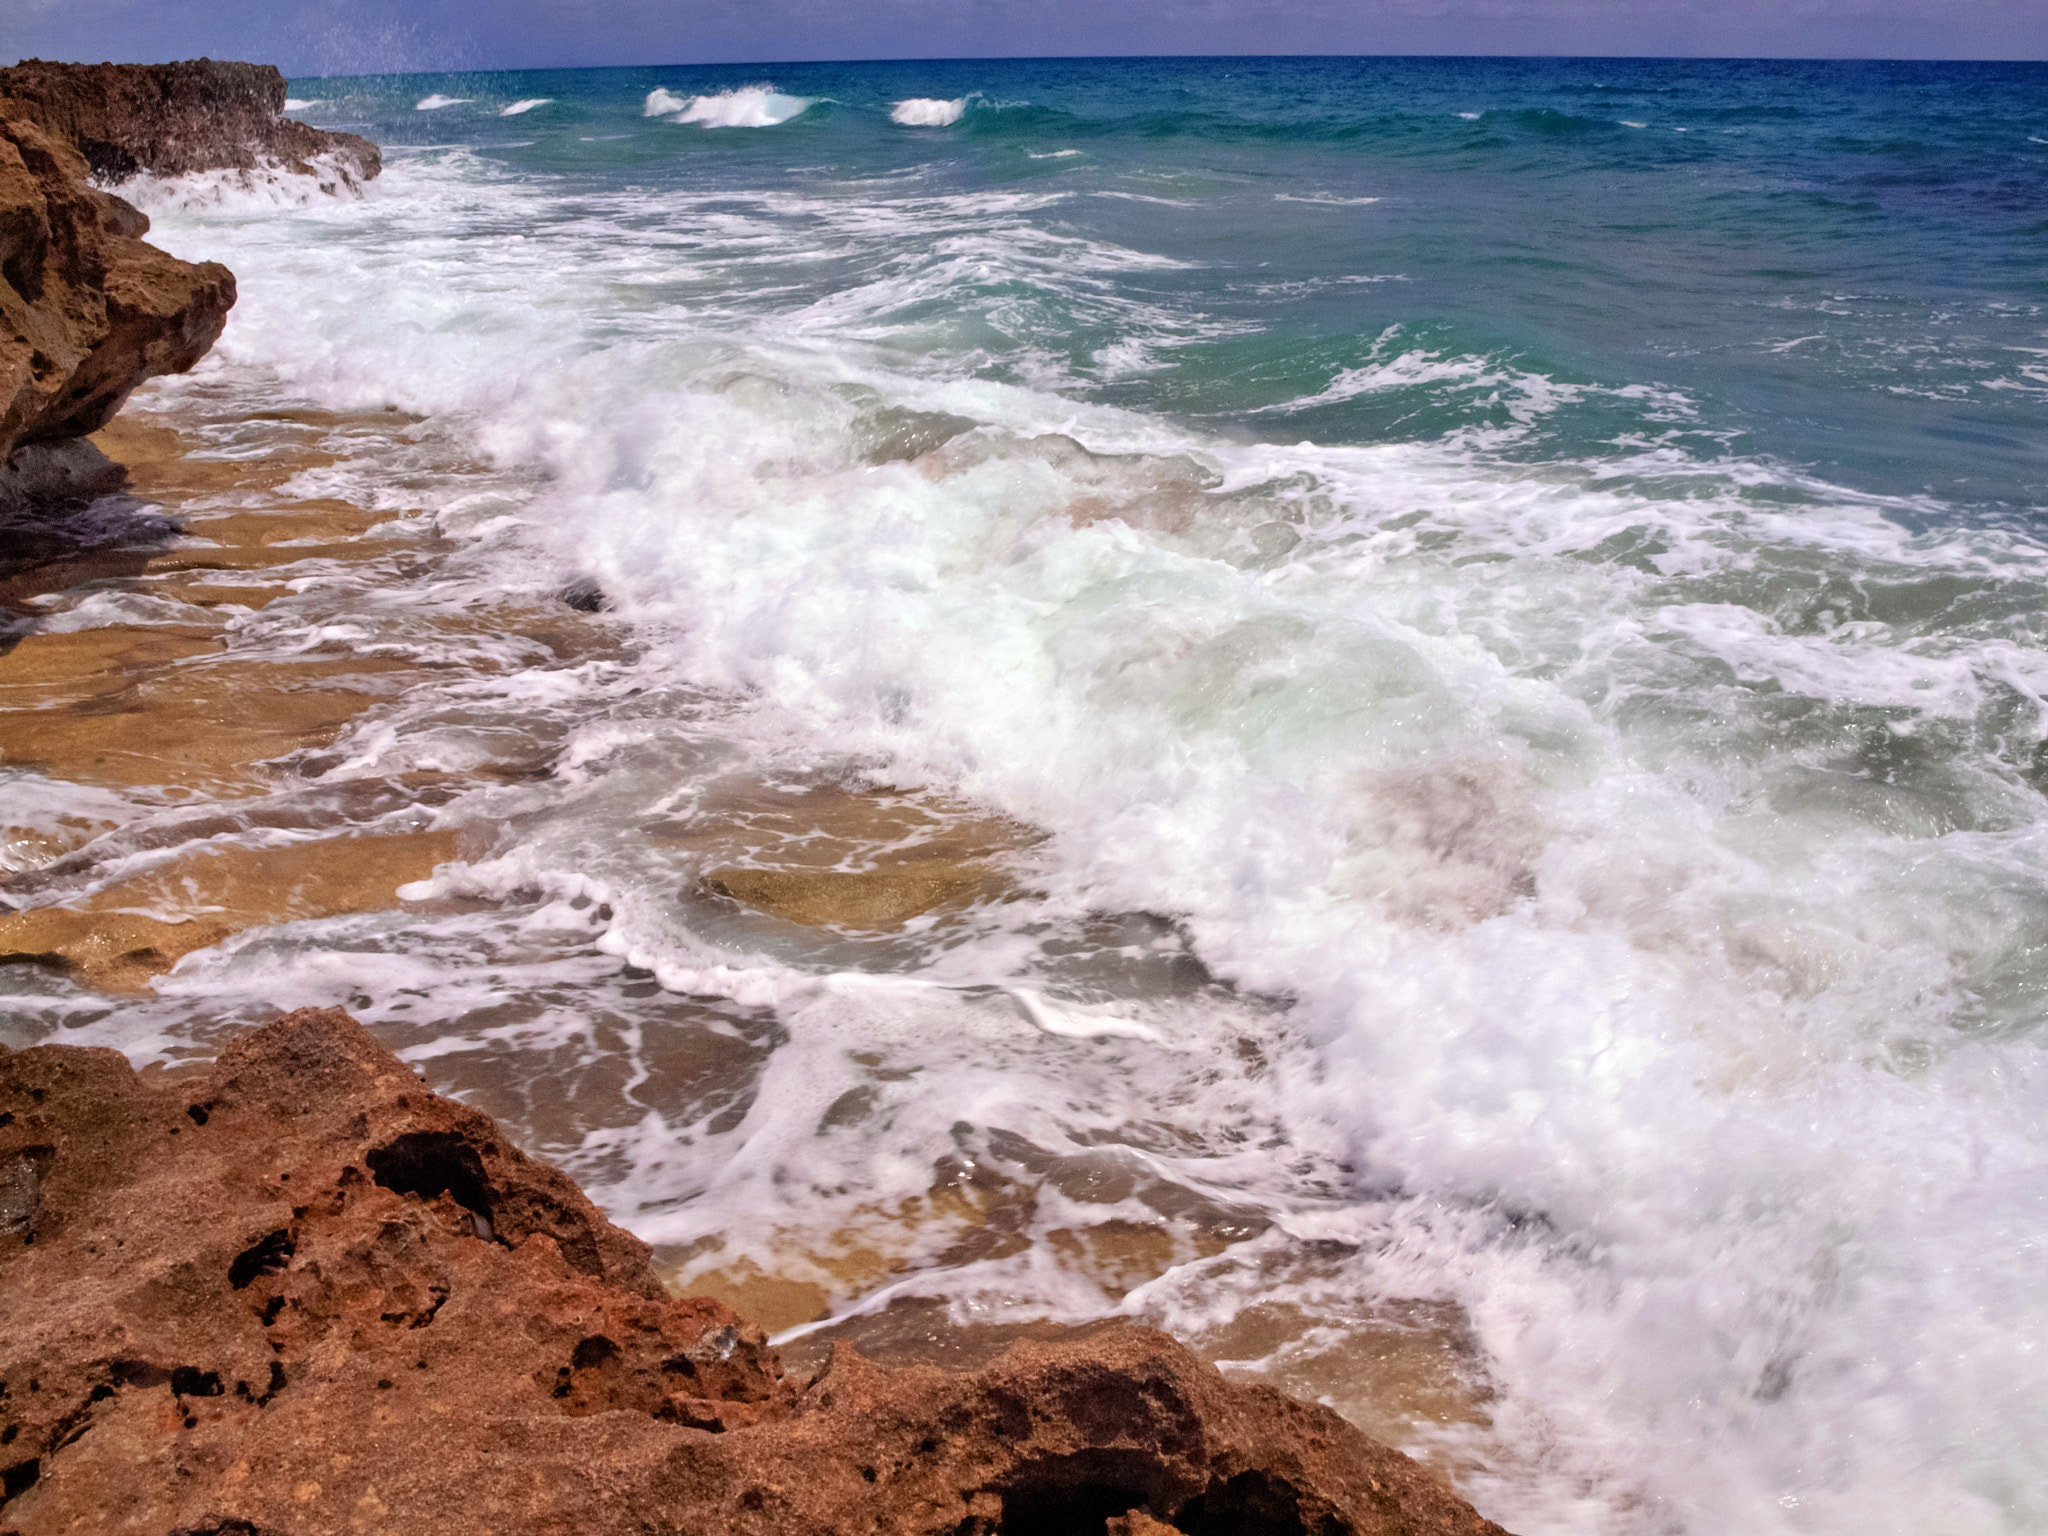 Olympus E-600 (EVOLT E-600) sample photo. The water's fine at blowing rocks photography